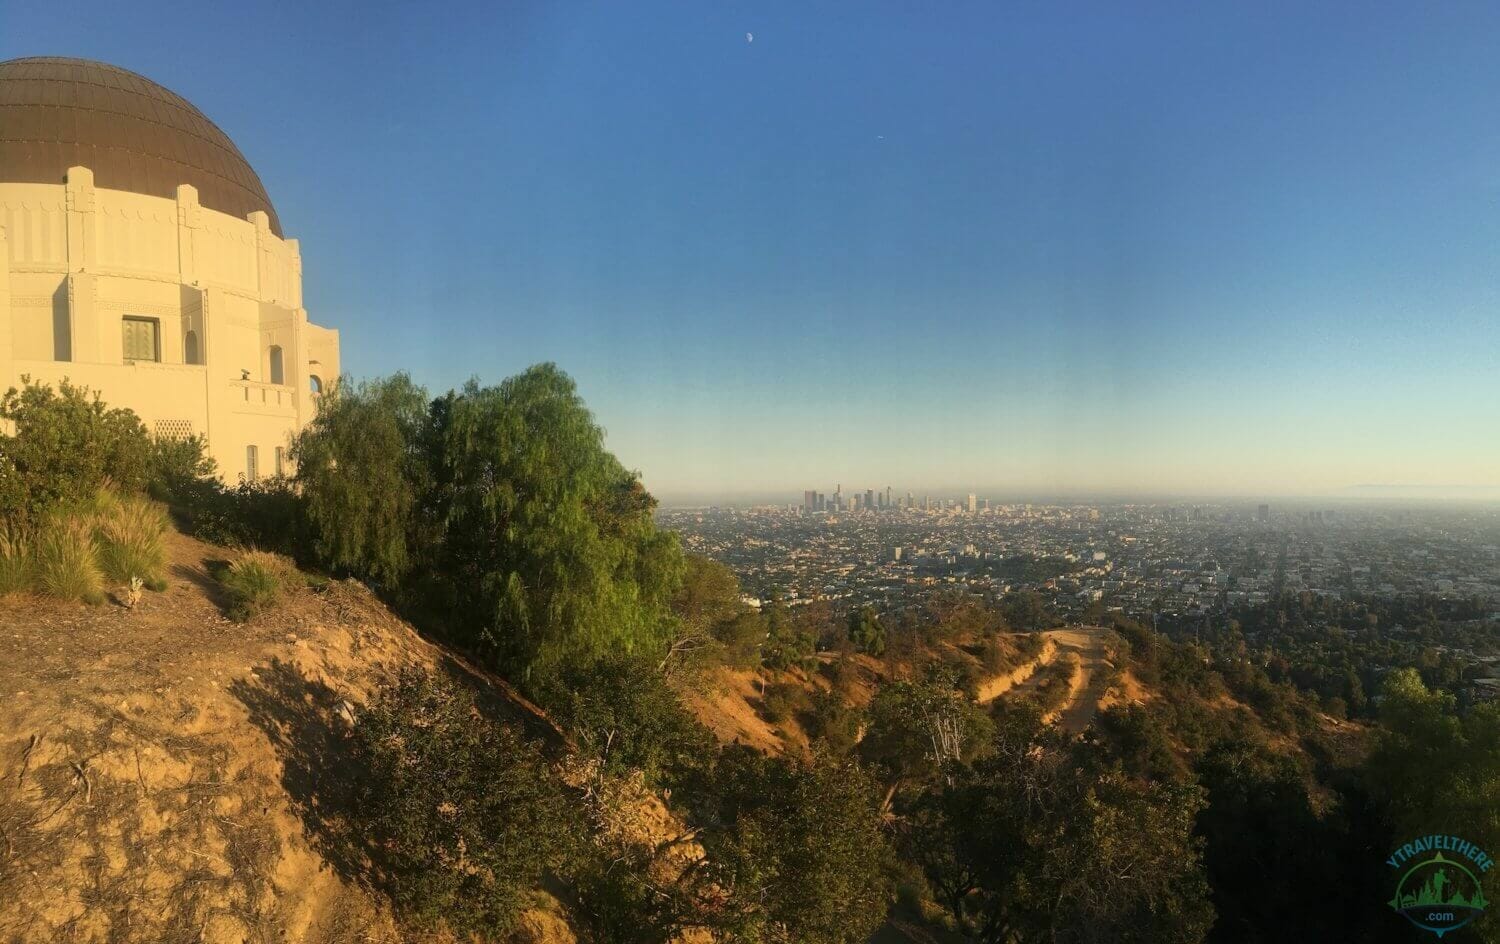 Downtown L.A. Griffith observatory